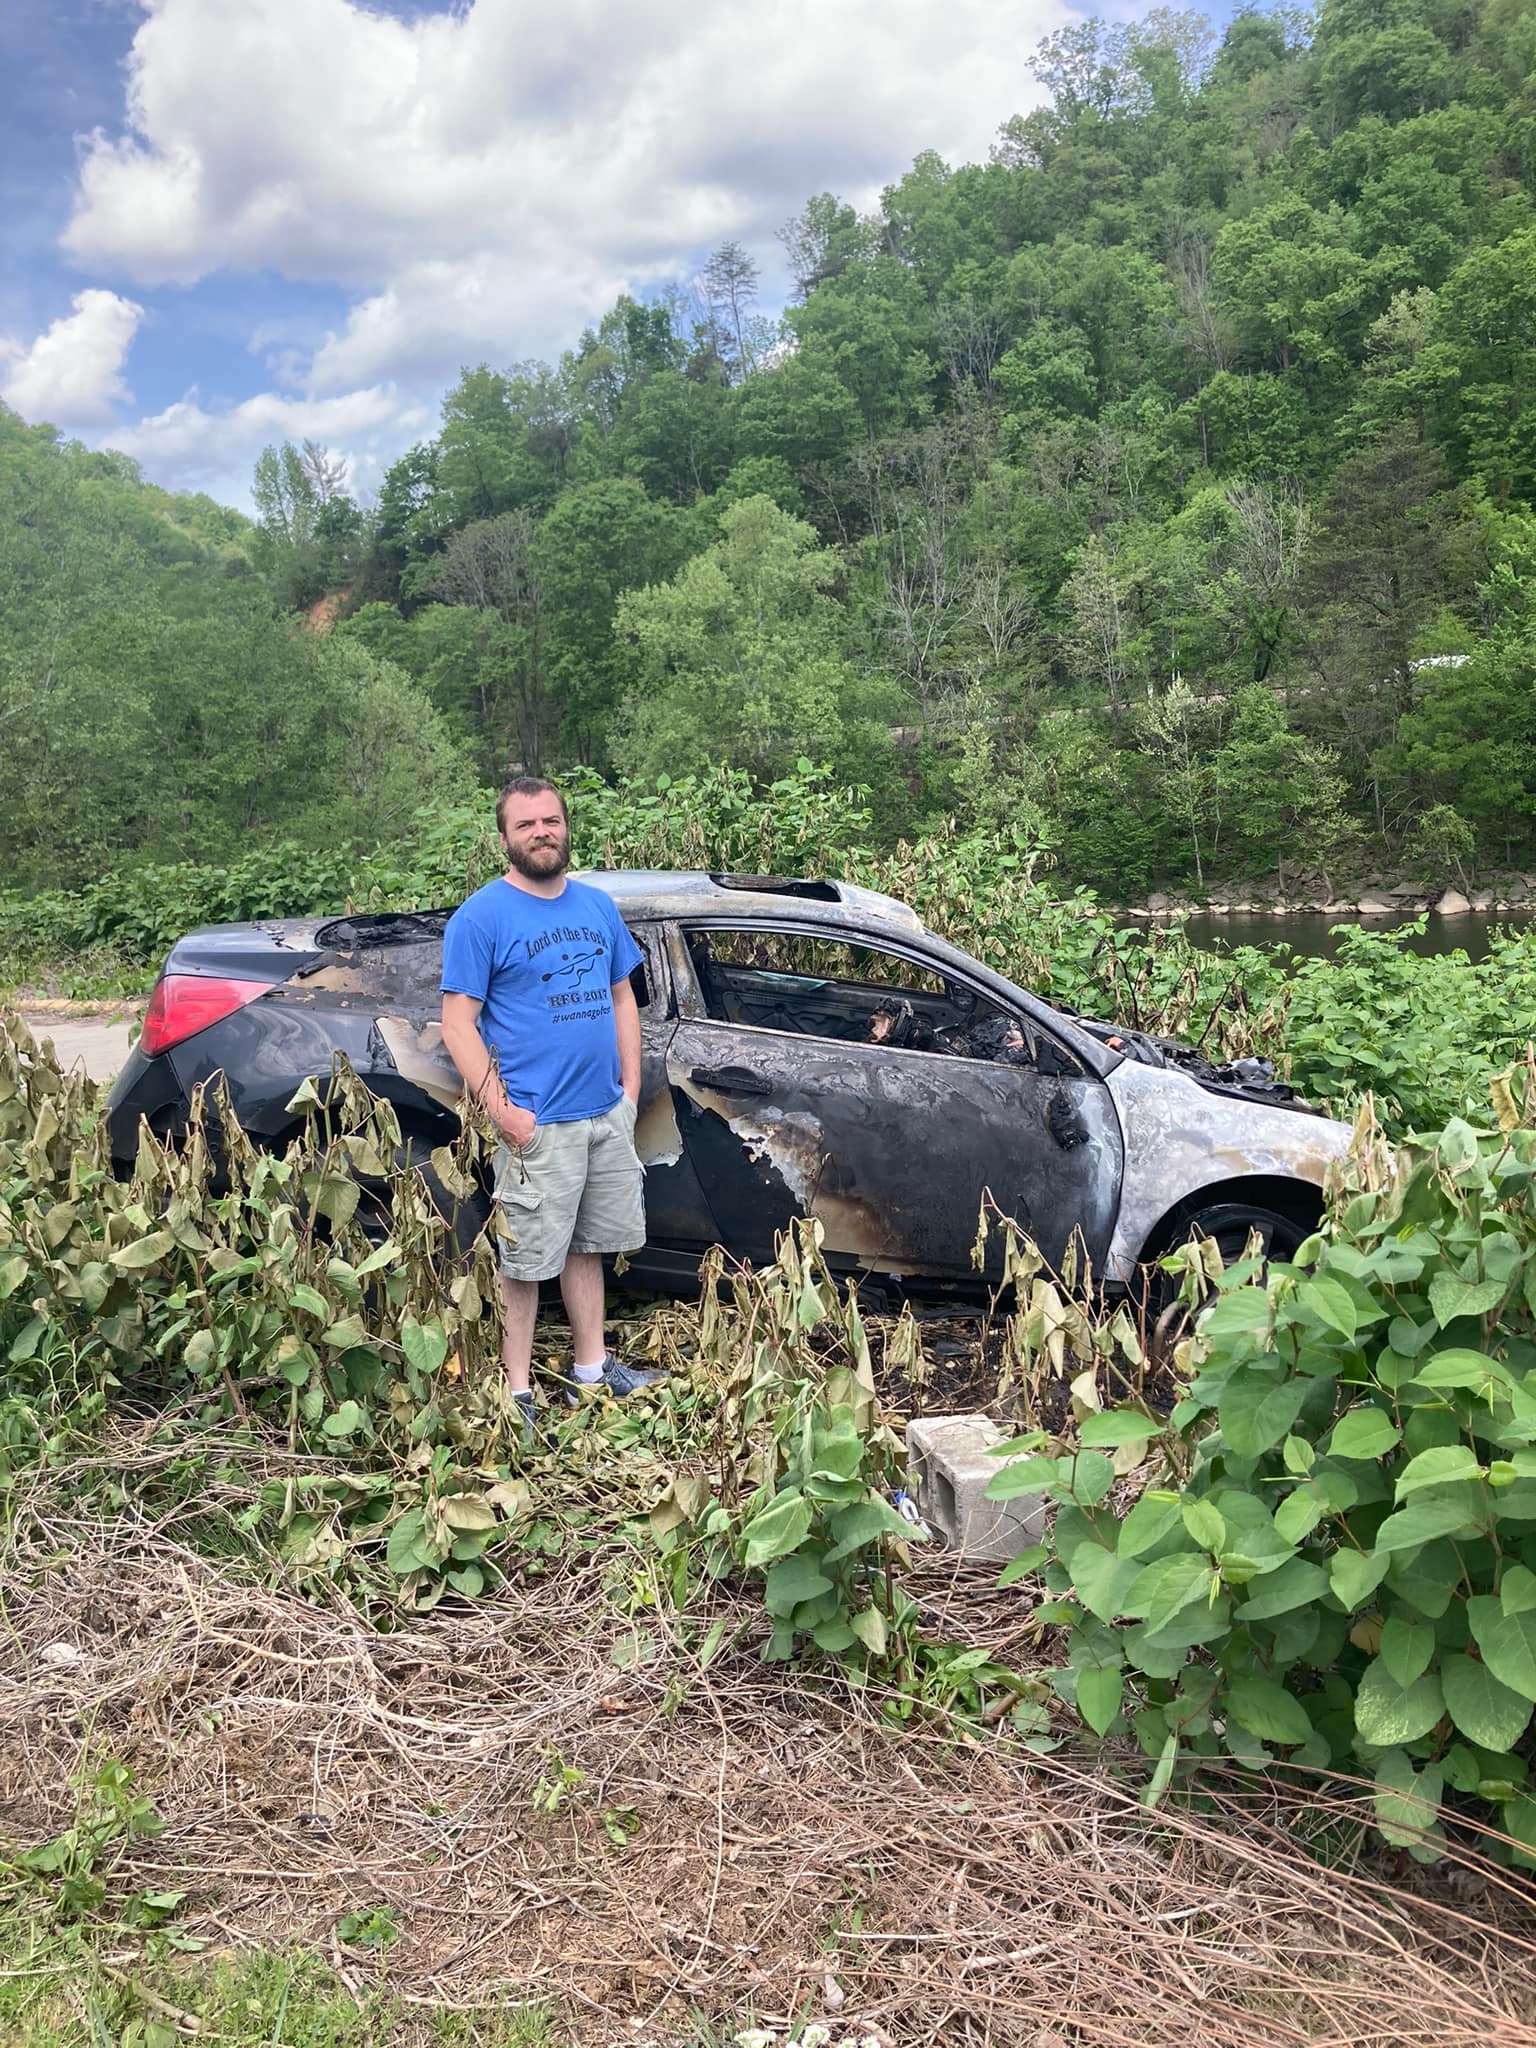 justin quesenberry standing next to a car that caught on fire and is not burned.